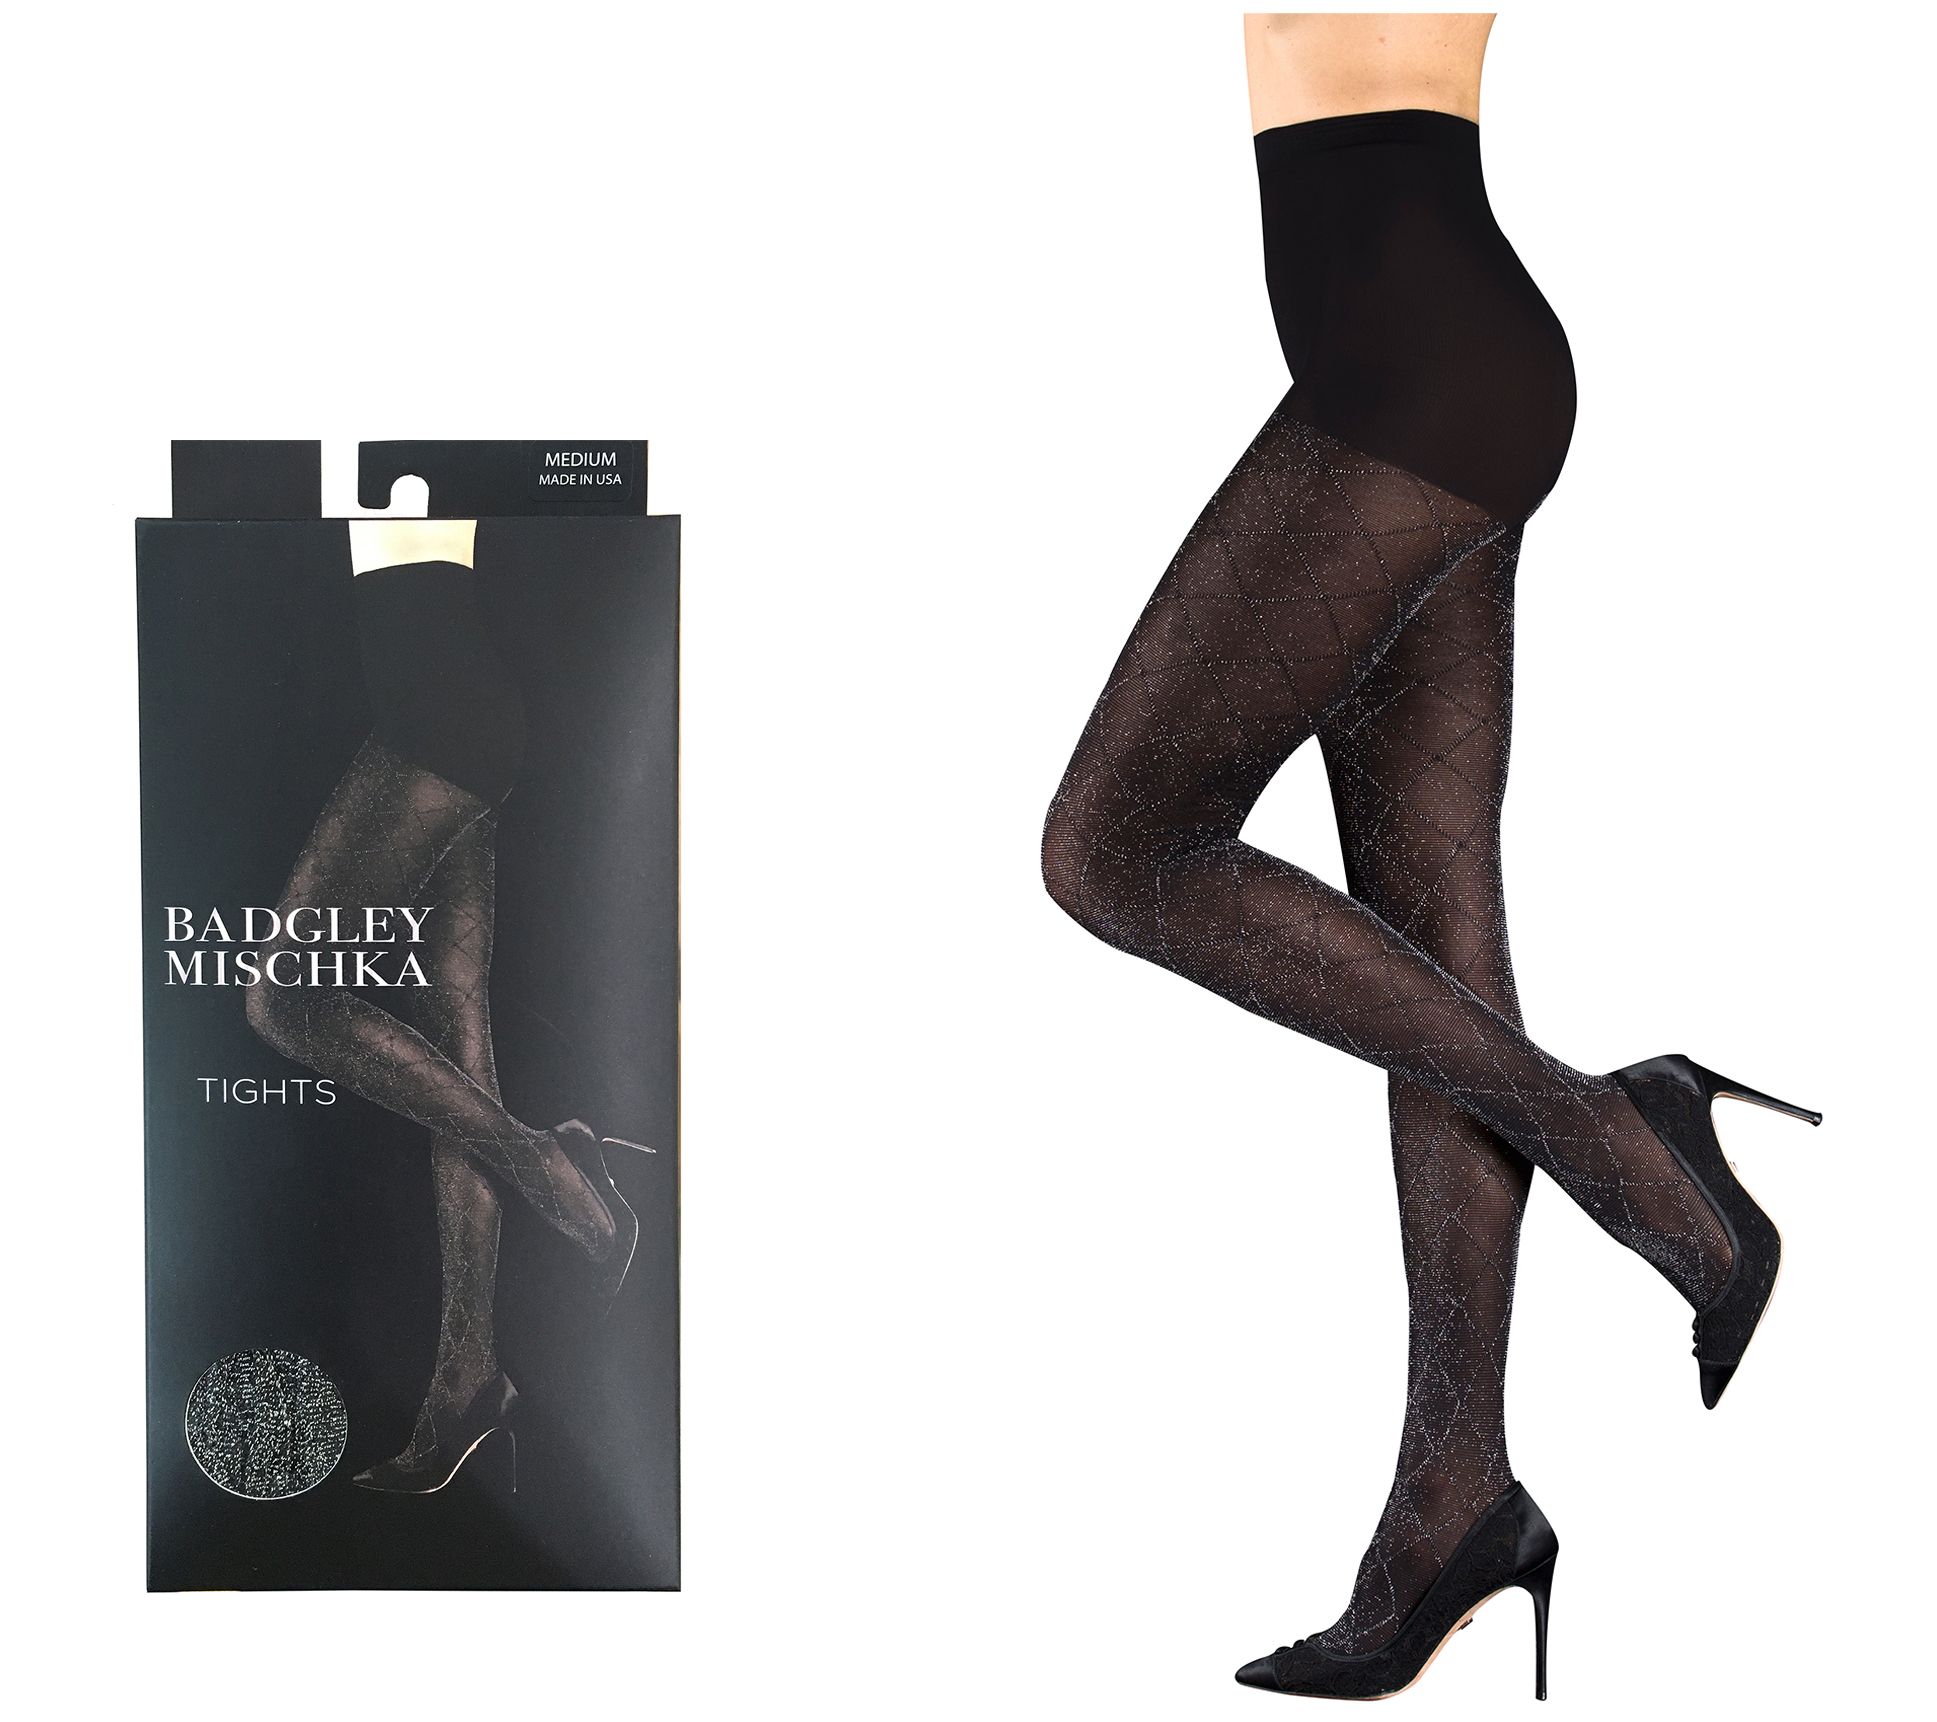 Shapermint Essentials Shaping Tights 